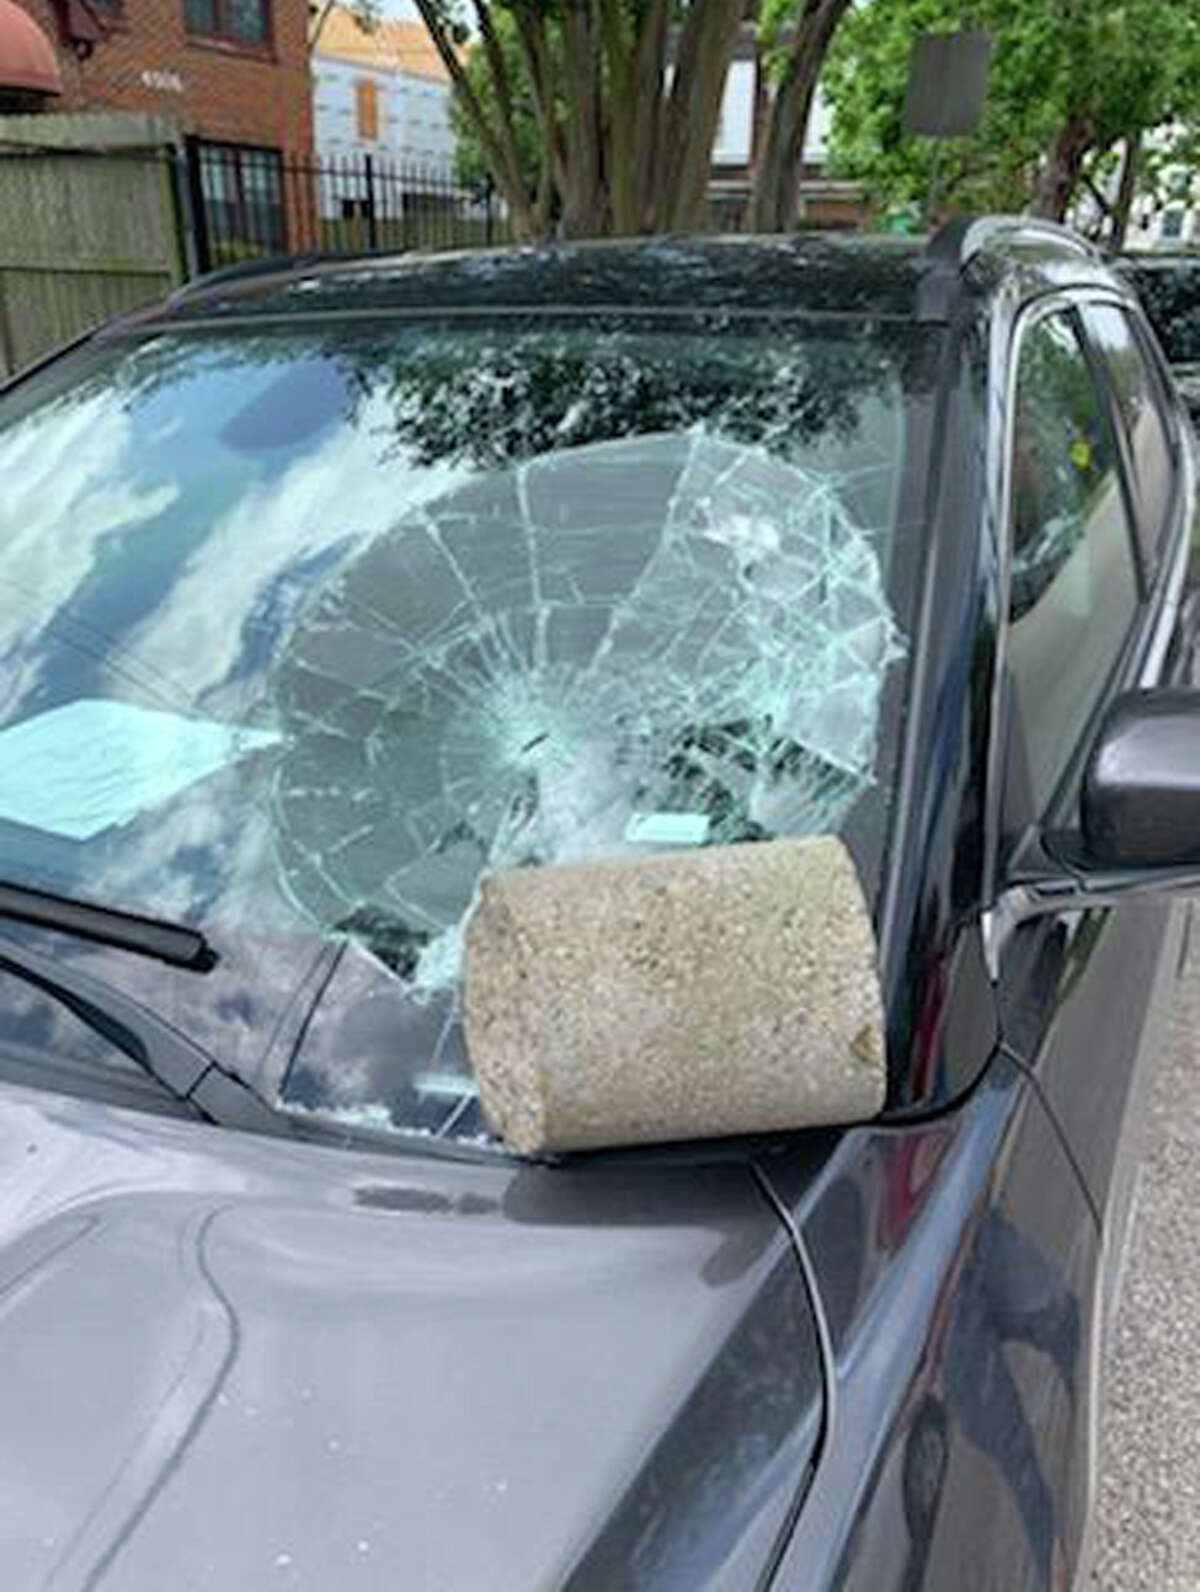 Museum District resident Jennyfer Herrington discovered a mystery cement block had crushed her daughter's rental vehicle on Thursday.